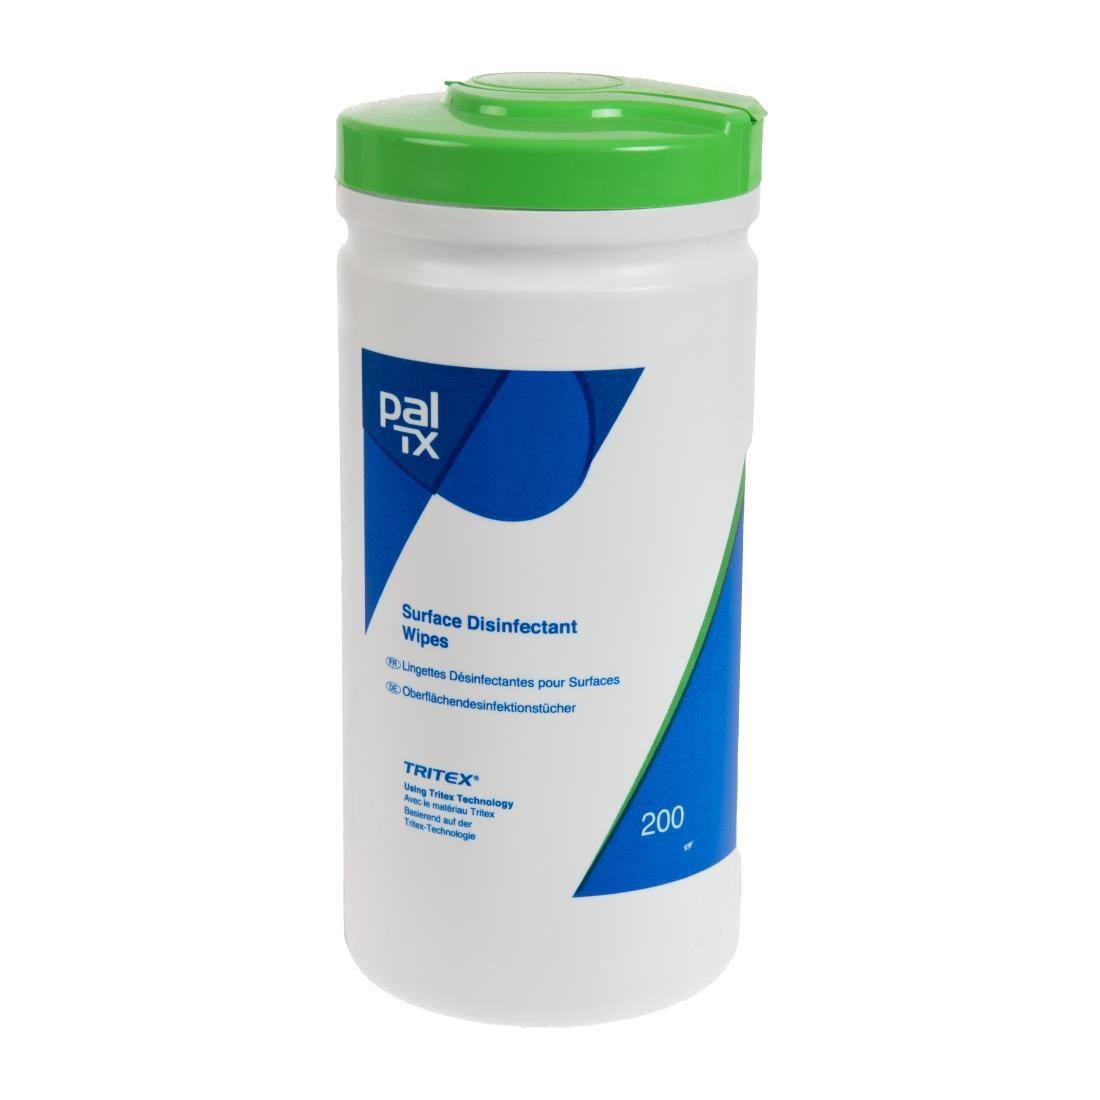 Pal TX Disinfectant Surface Wipes (200 Pack) - CC197  - 1